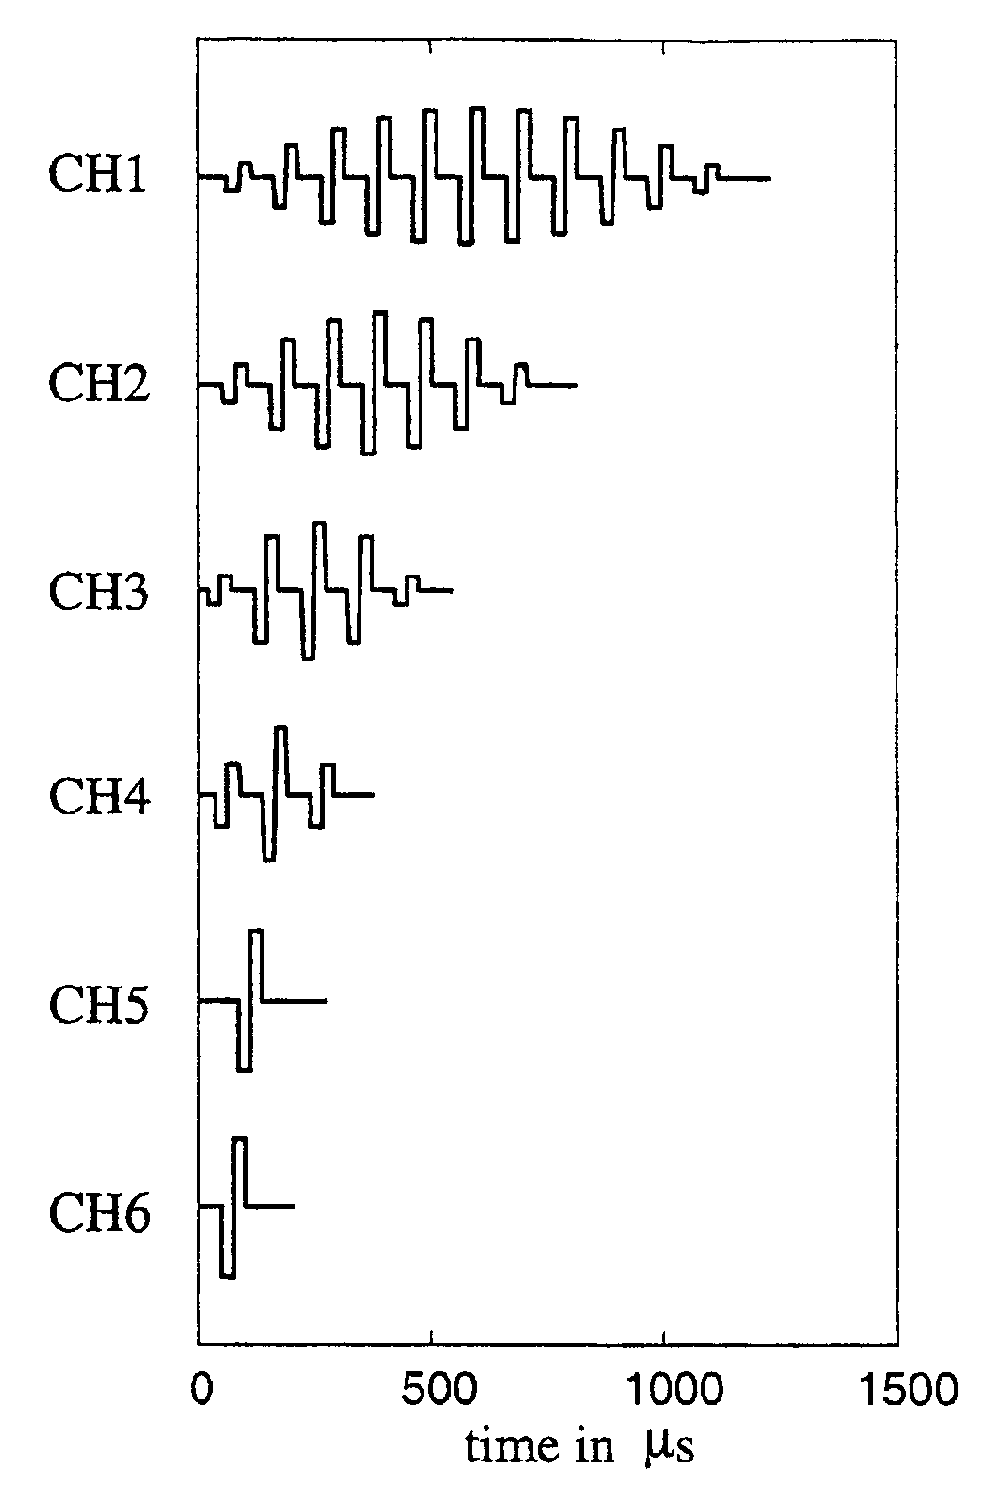 Electrical Nerve Stimulation Based on Channel Specific Sequences